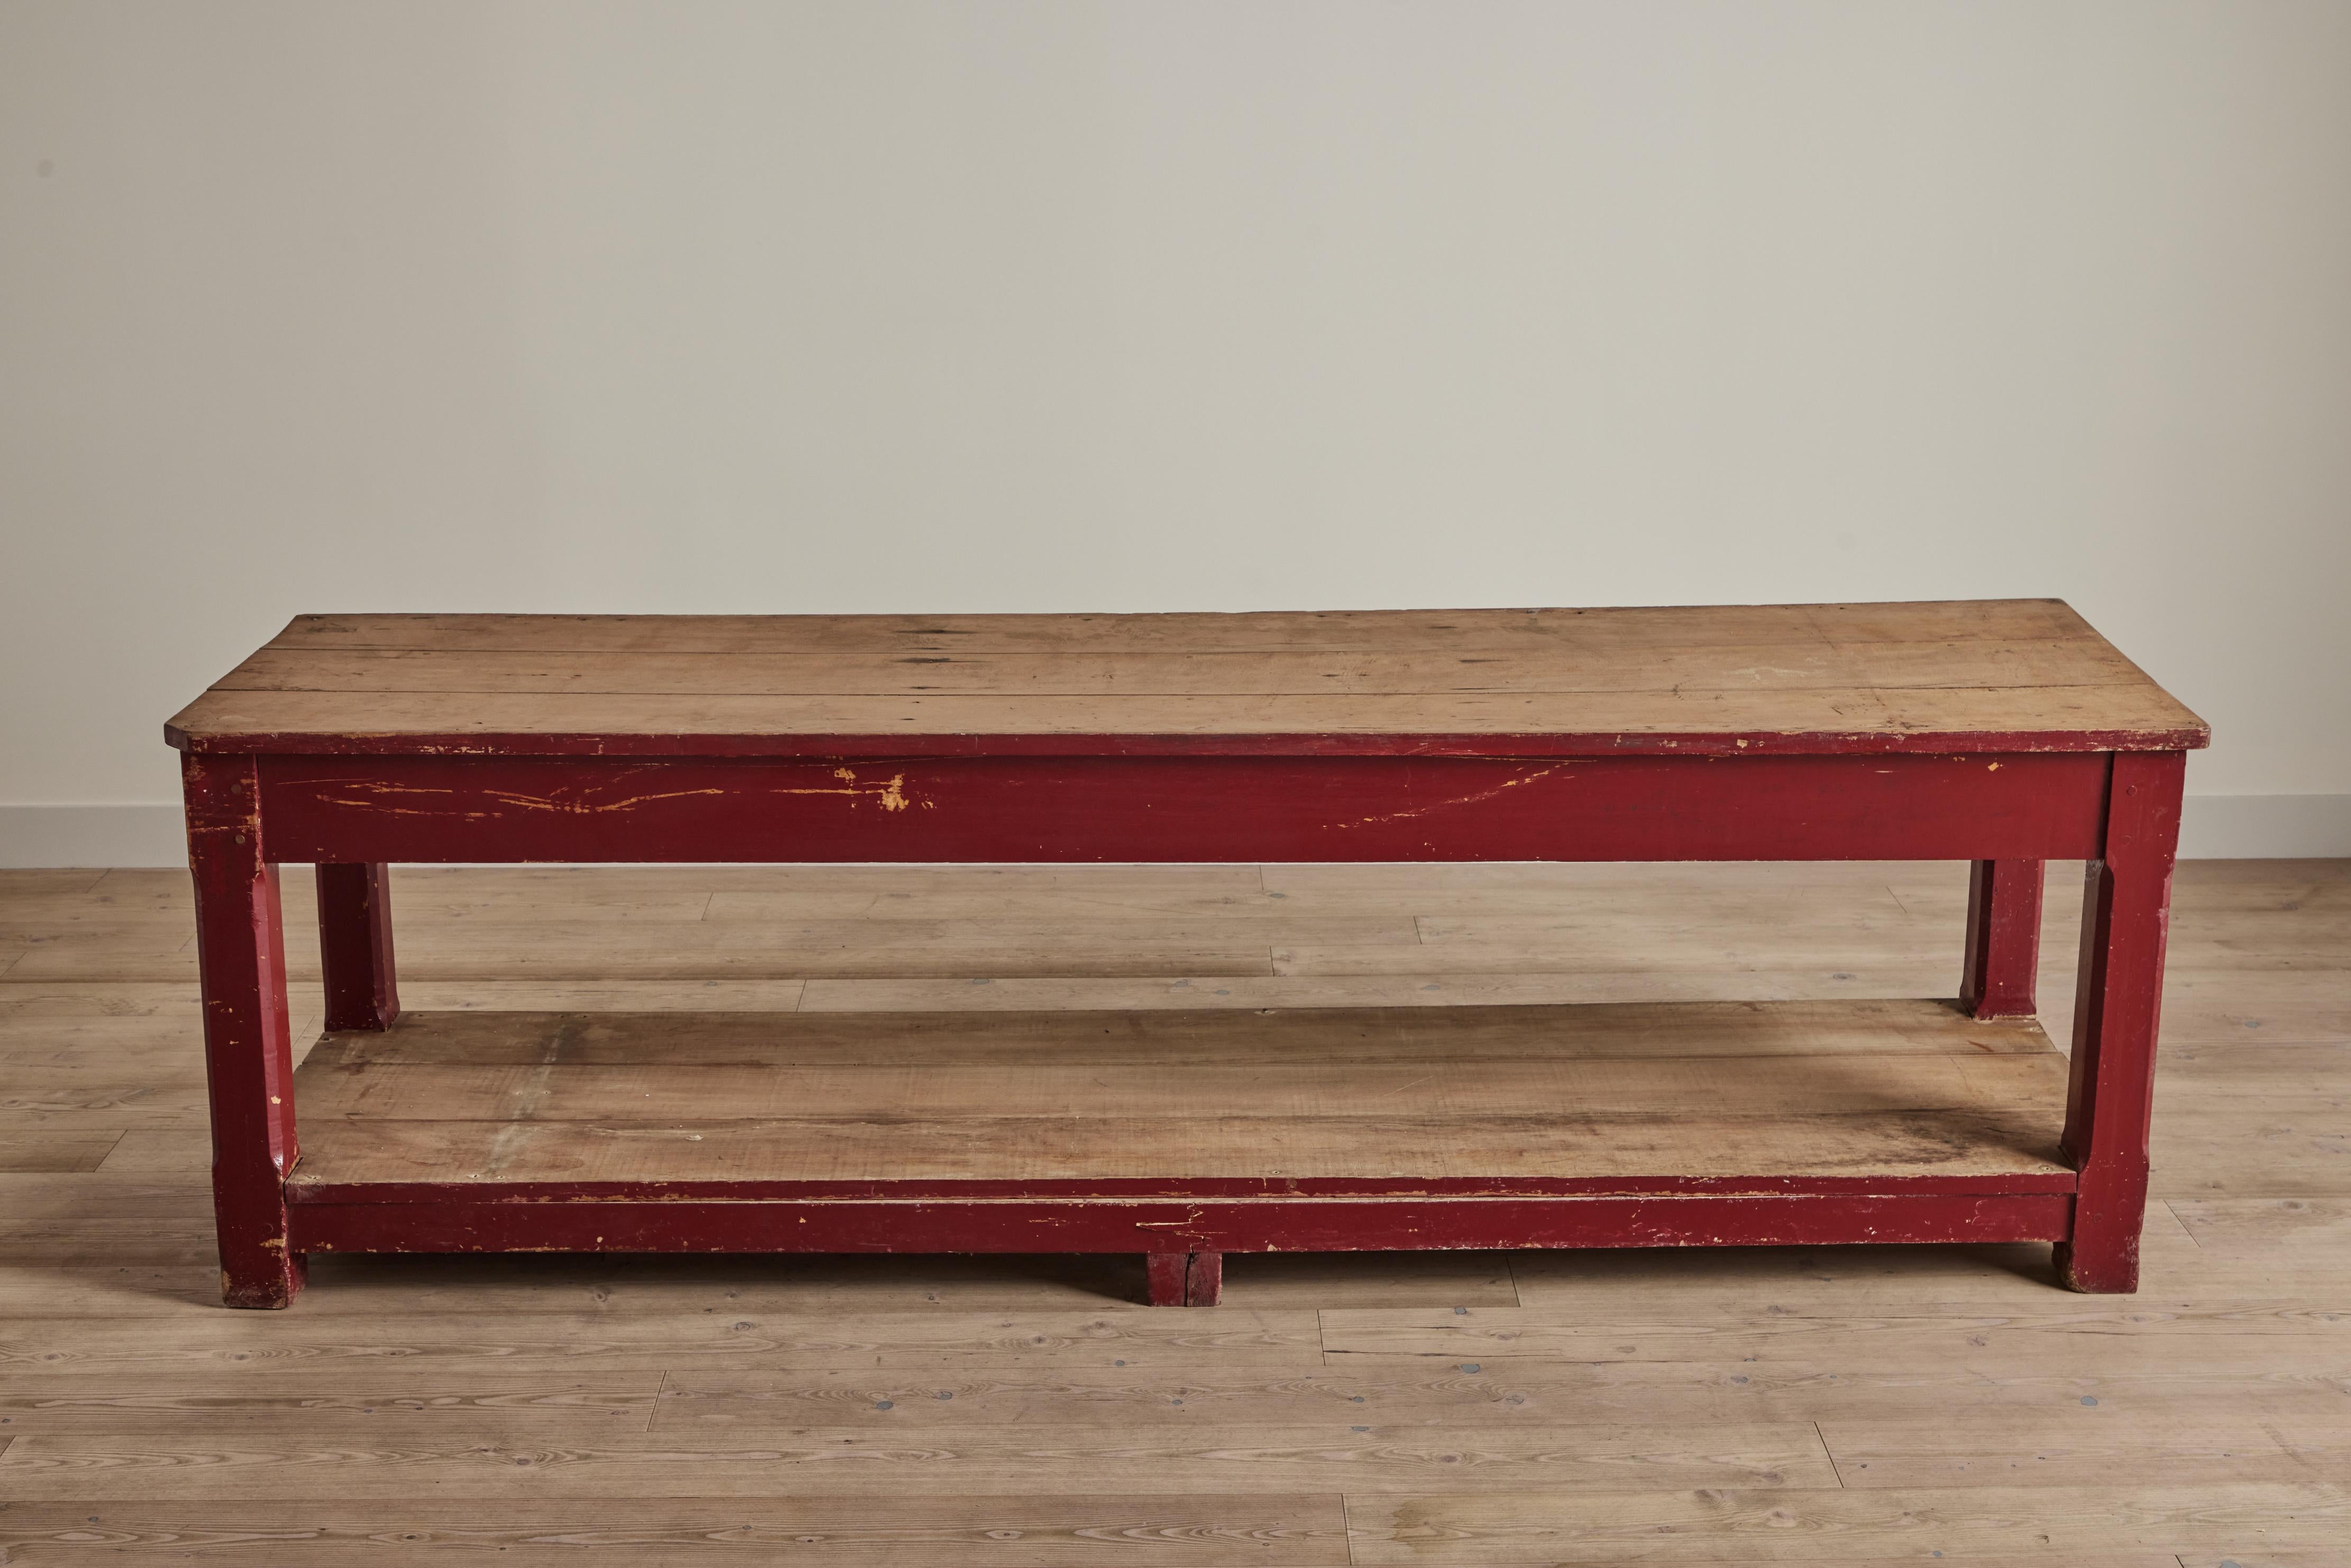 Painted red general store wood table with lower shelf, United States circa 1900. Wear throughout on painted finish and wood that is consistent with age and use.